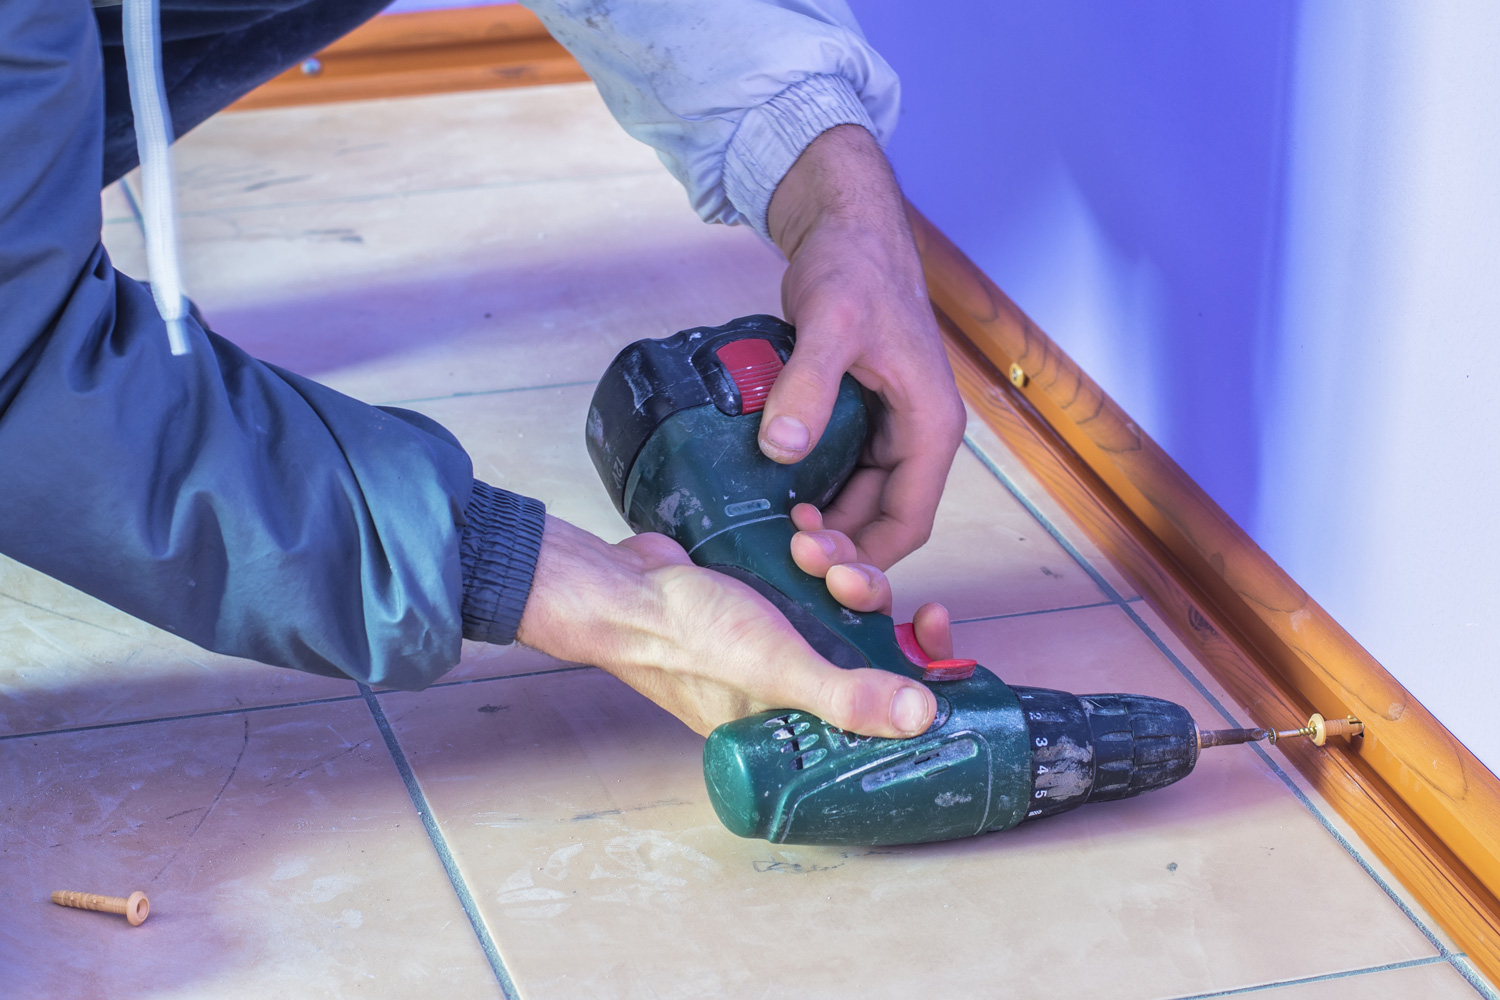 installing baseboards on the floor using a screwdriver